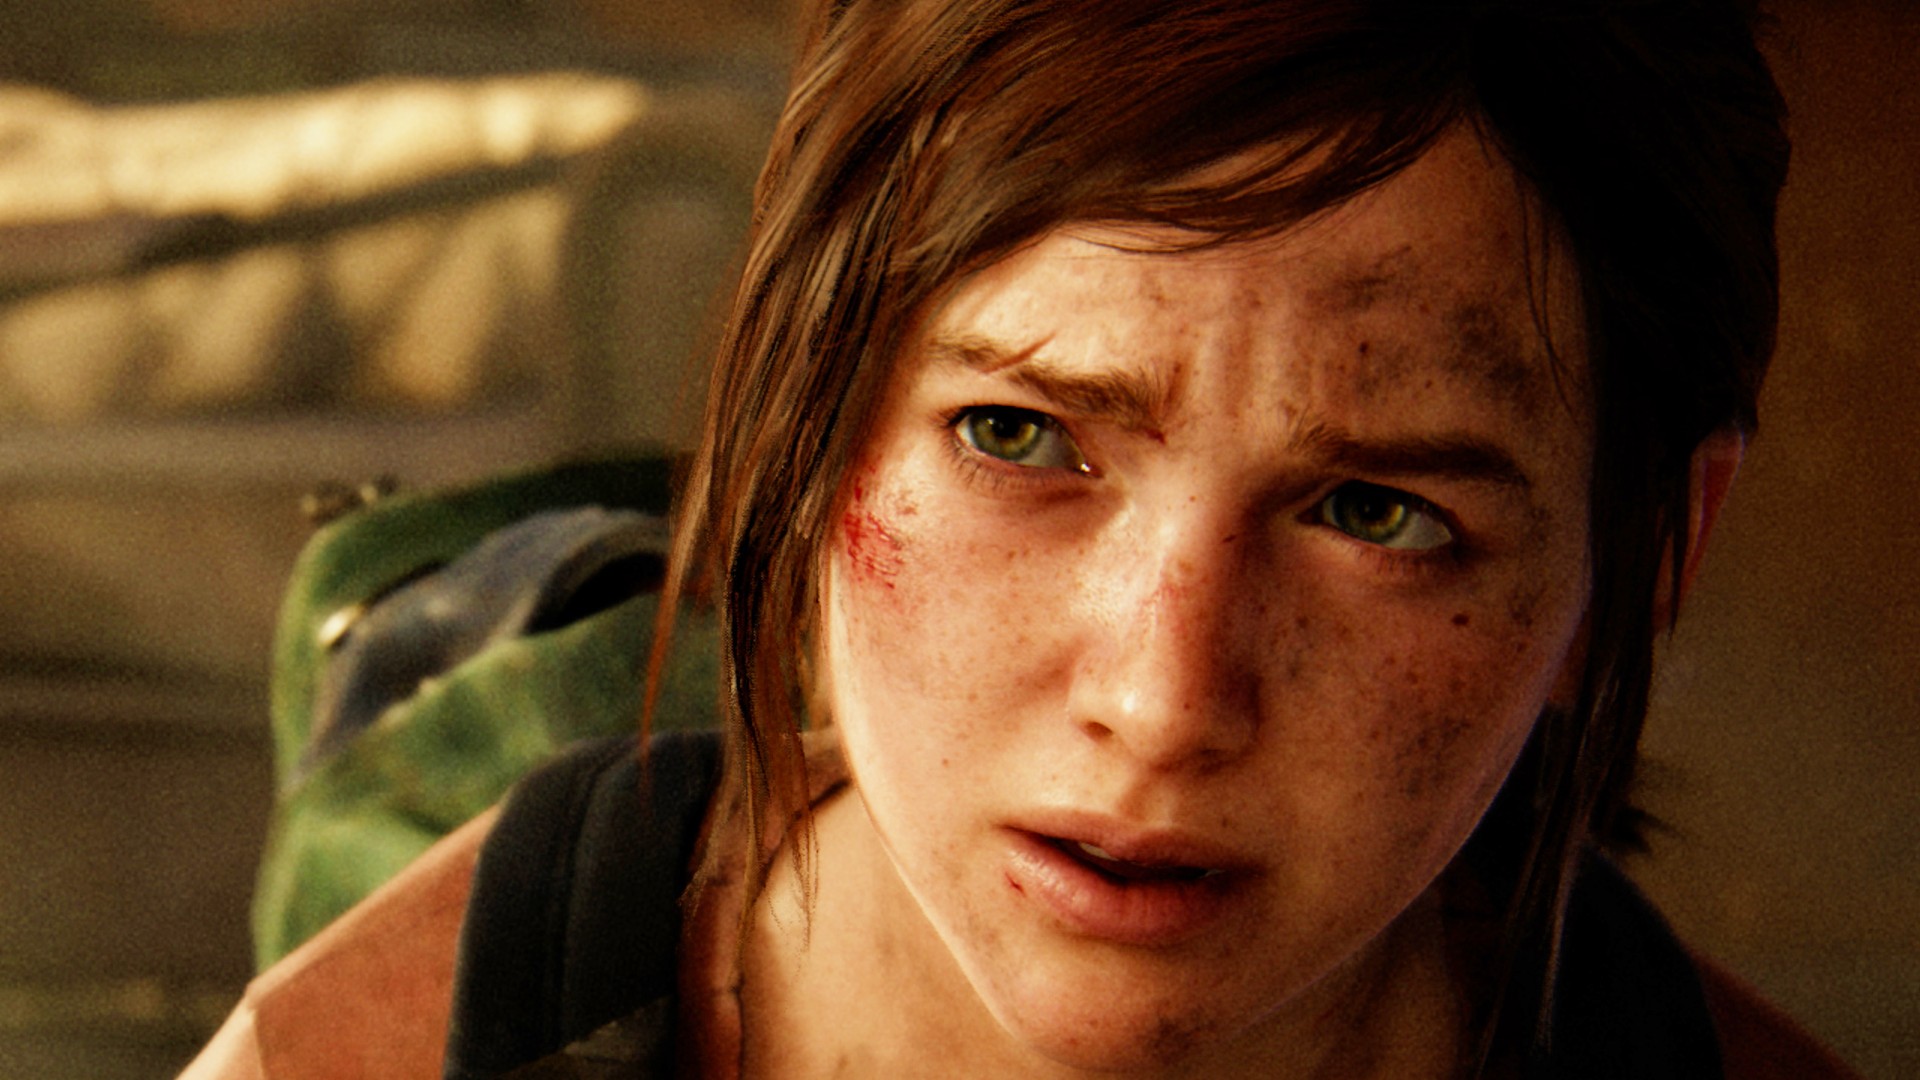 The Last of Us easter egg hints at Naughty Dog's new fantasy game